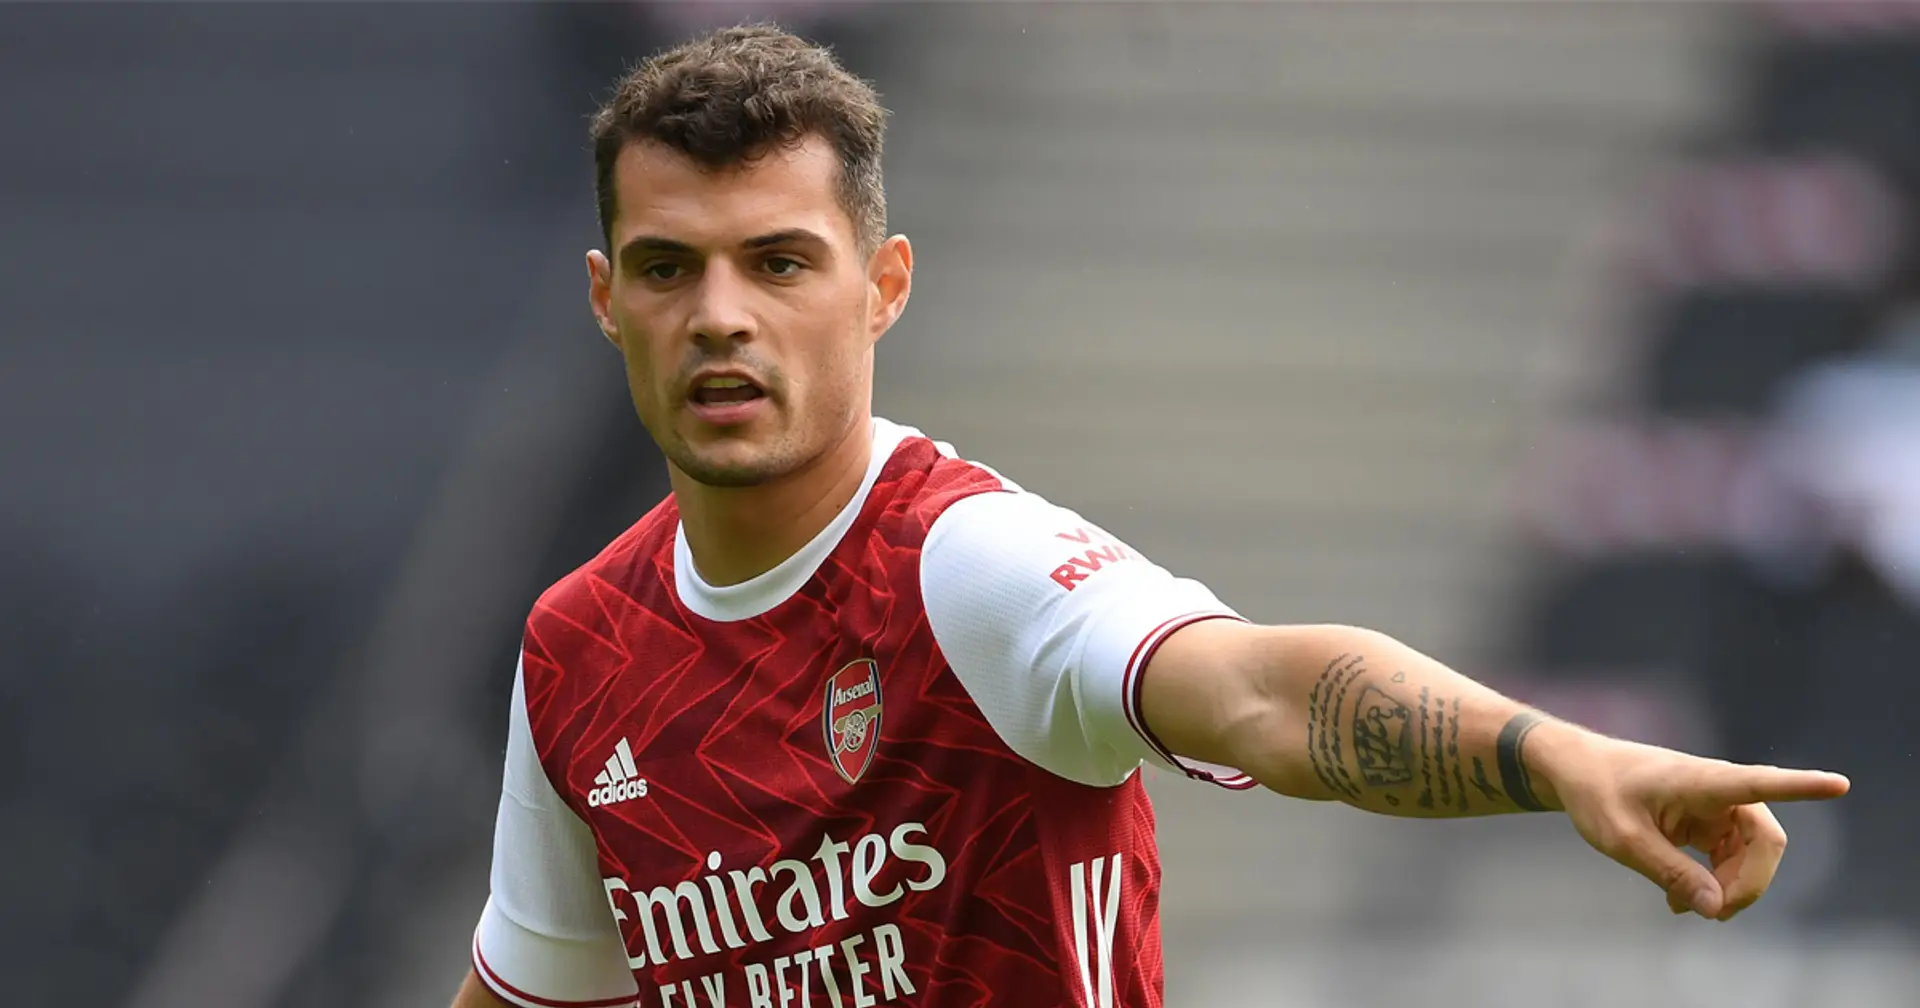 Emirates row and fantastic resurgence: 7 events that shaped insane year for Xhaka as he turns 28